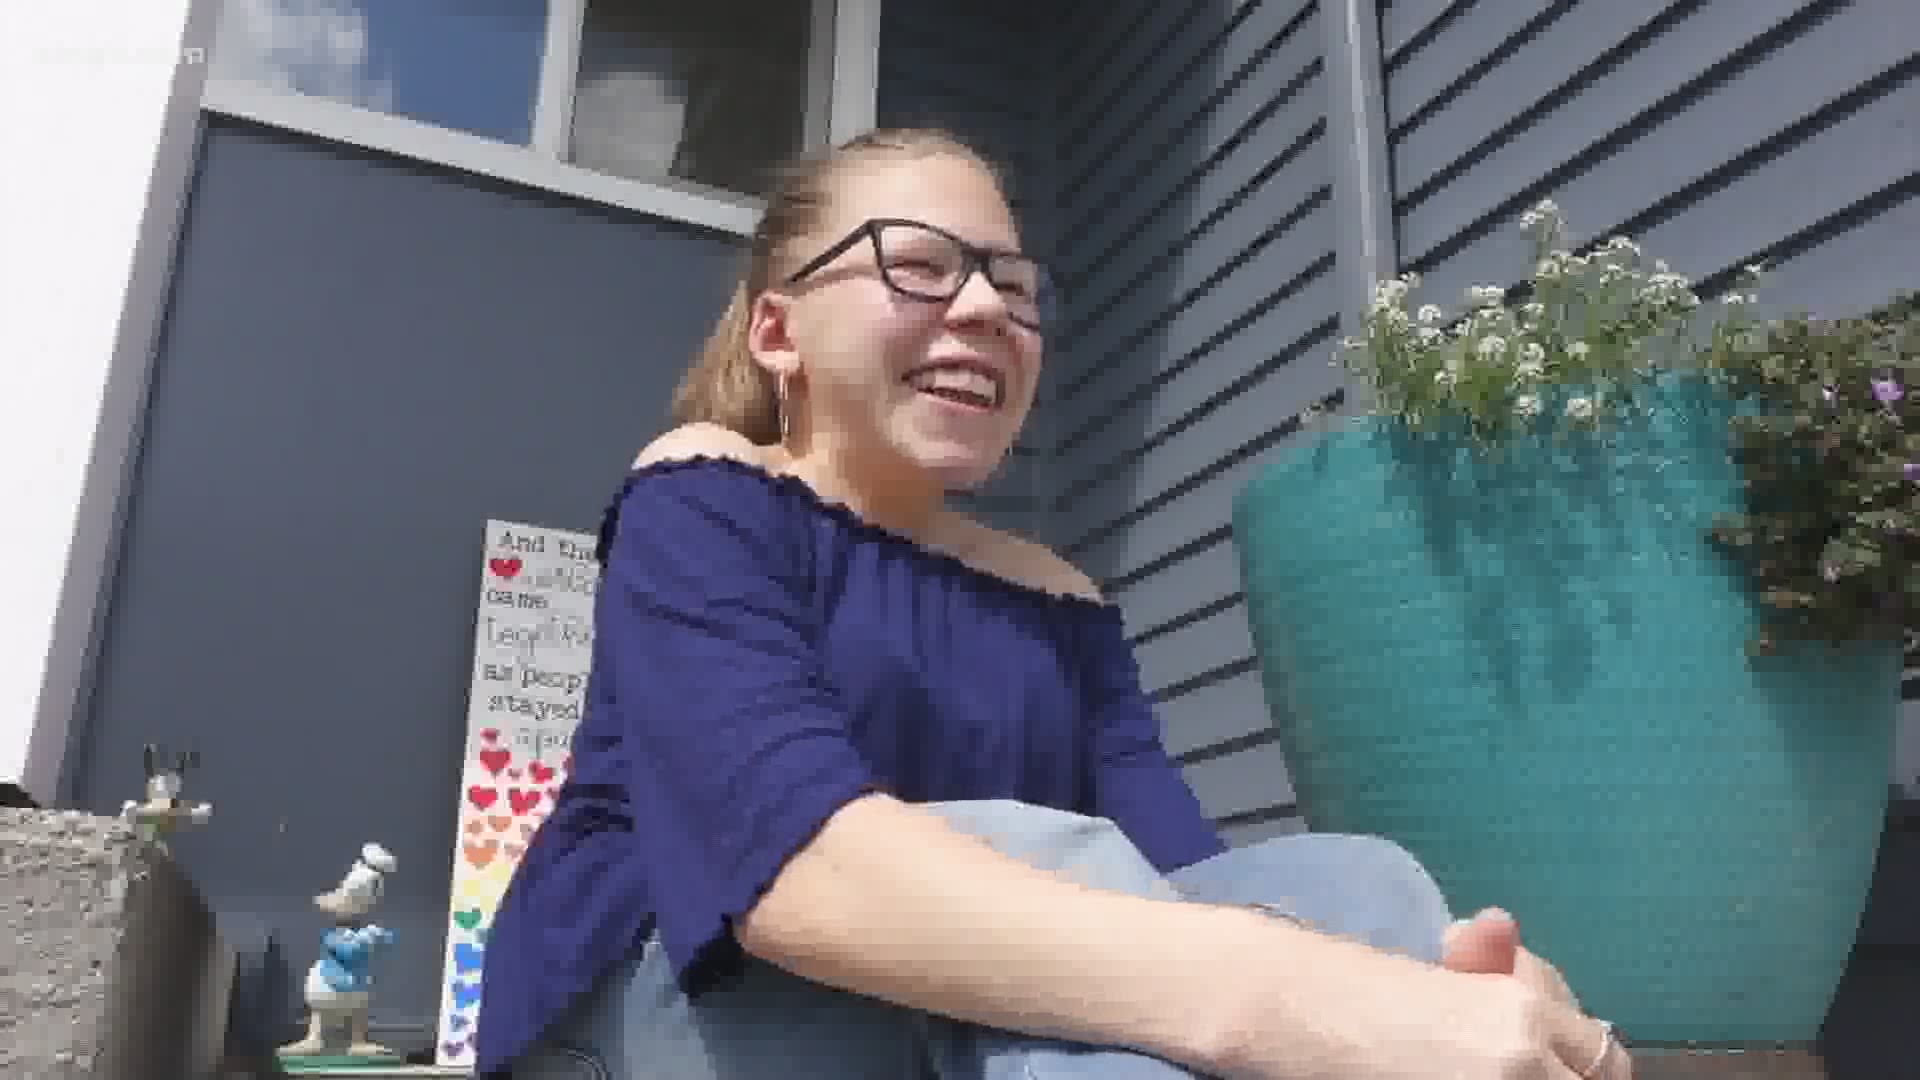 Cassidy Huff is one of about 150 people in the world to suffer from Conradi–Hünermann syndrome, a rare genetic condition. But she's not letting it slow her down.